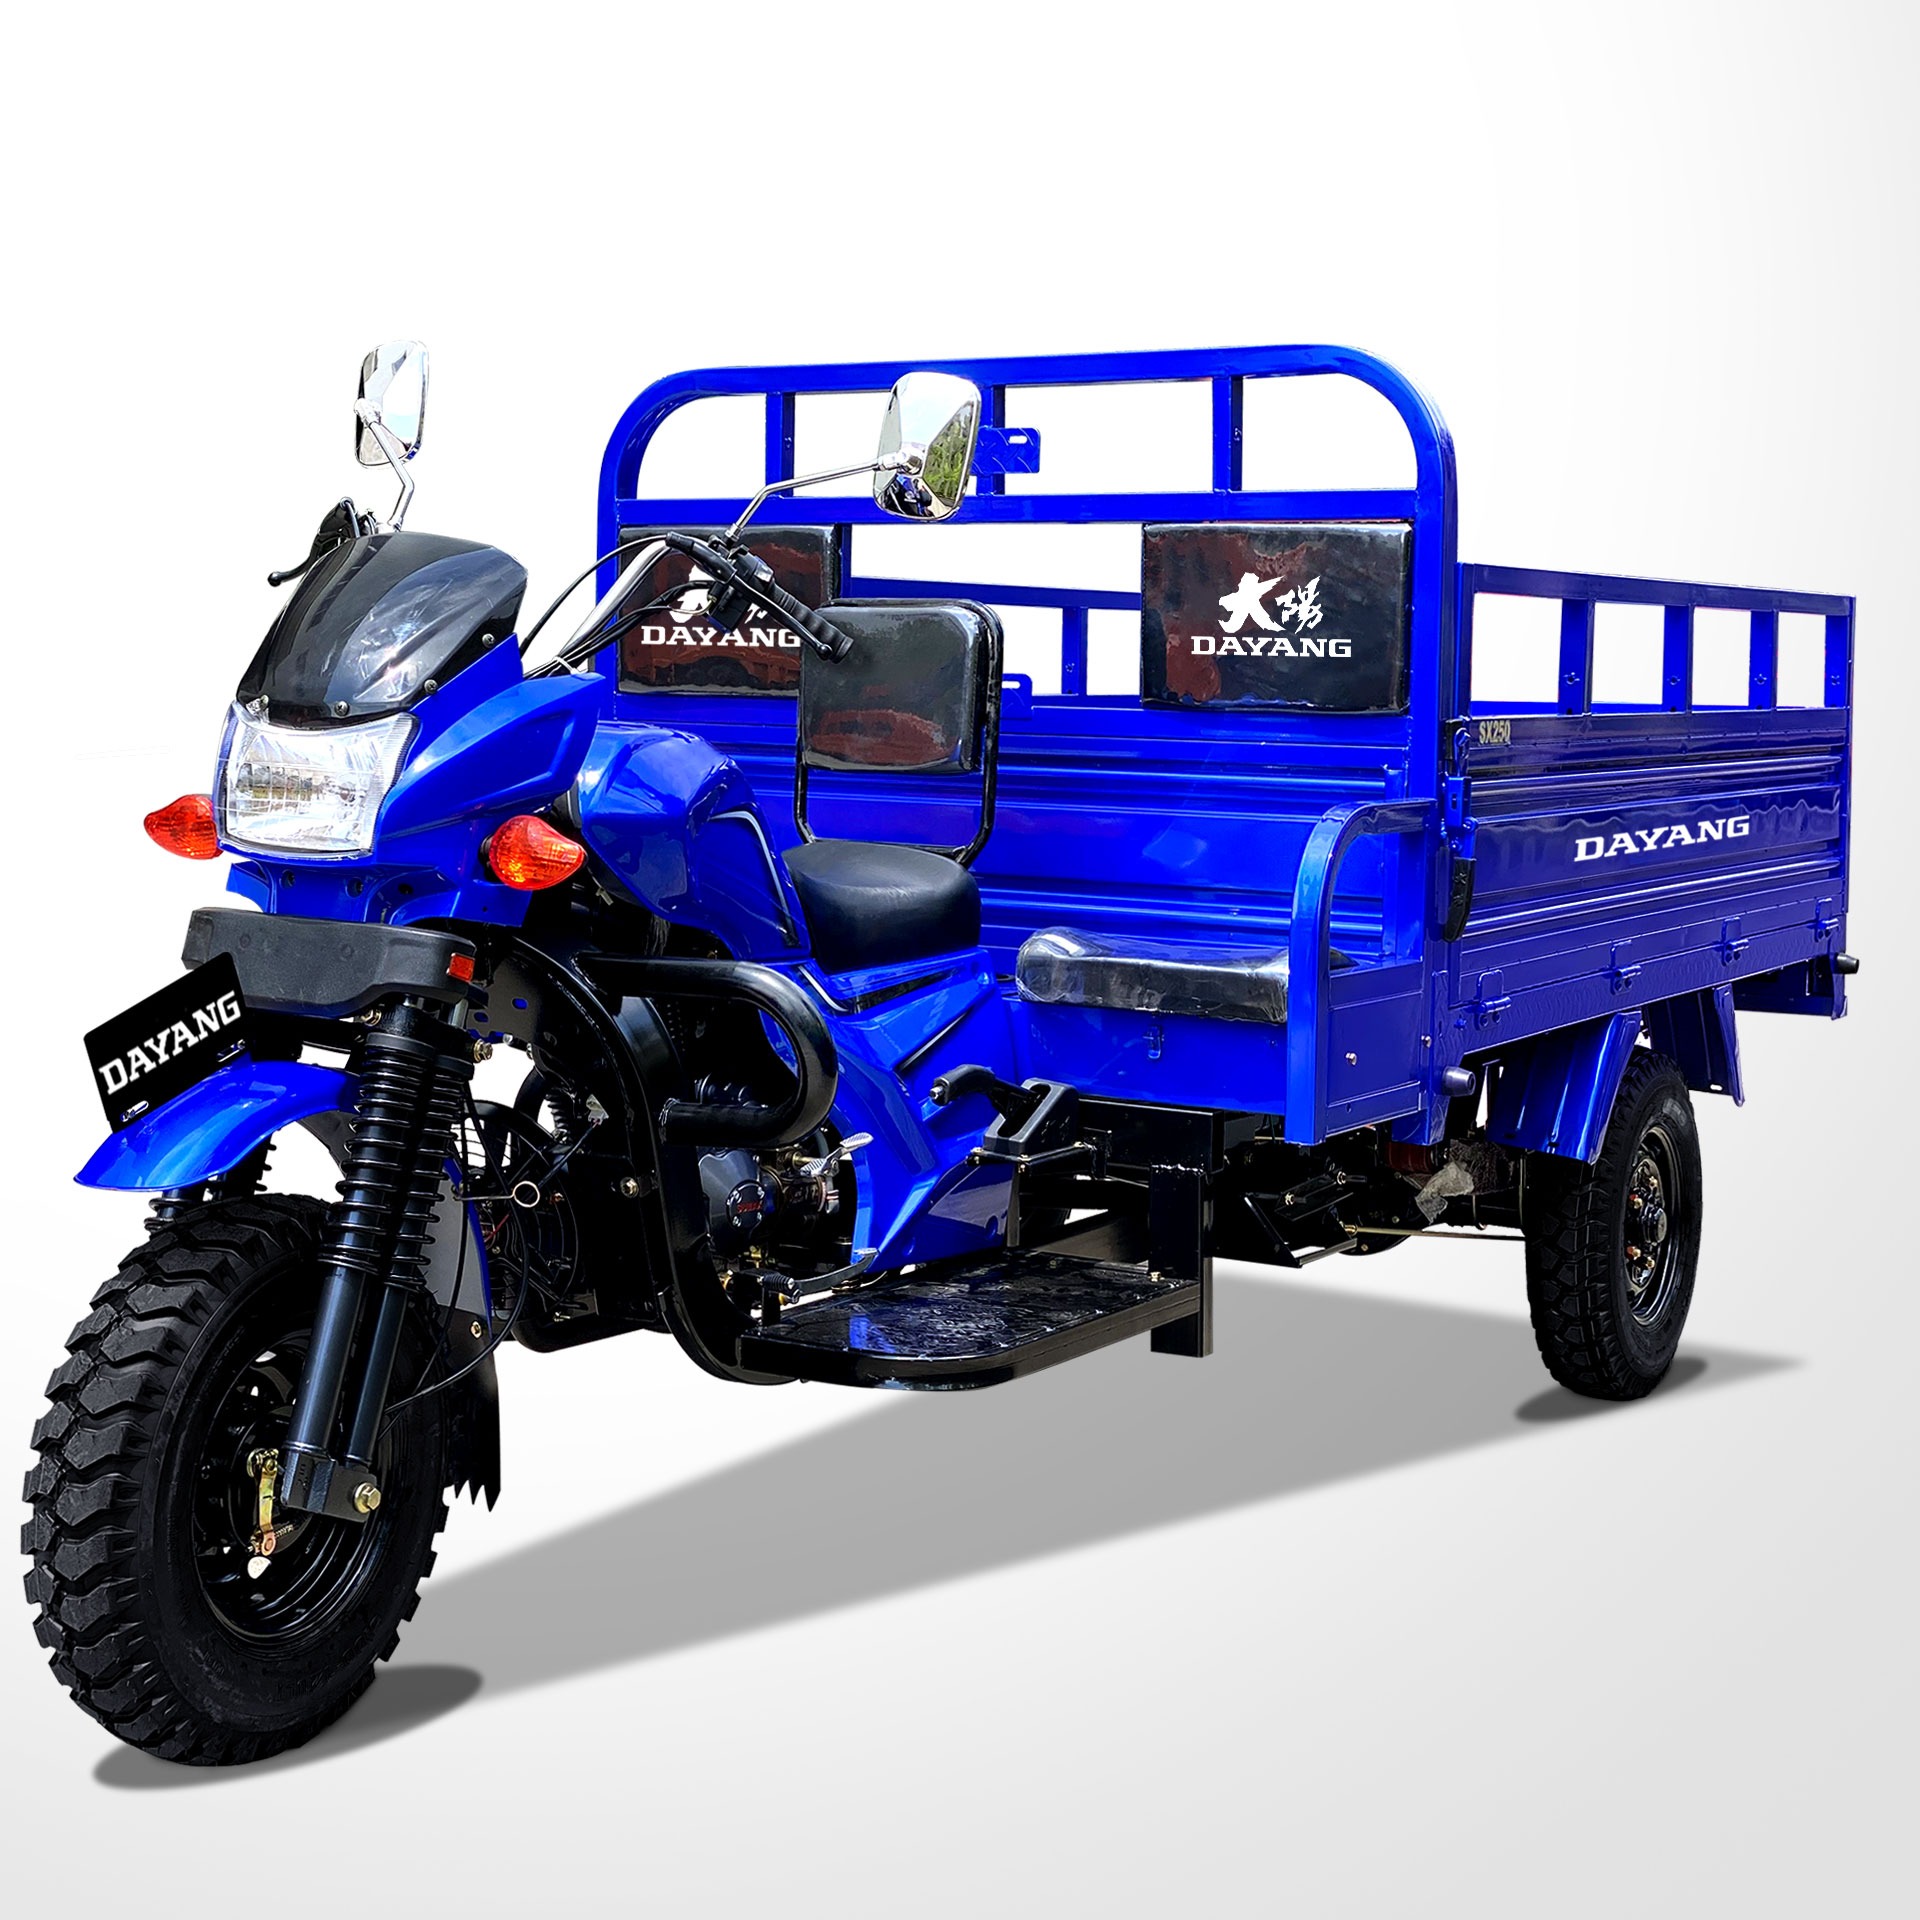 Electric Carmotorcyce Electric Motorcycleelectric Rickshaw Mobility Scooterelectric Vehicle 250cc Motorcycle Electric Vehiclesdisabled Scootermotor Car